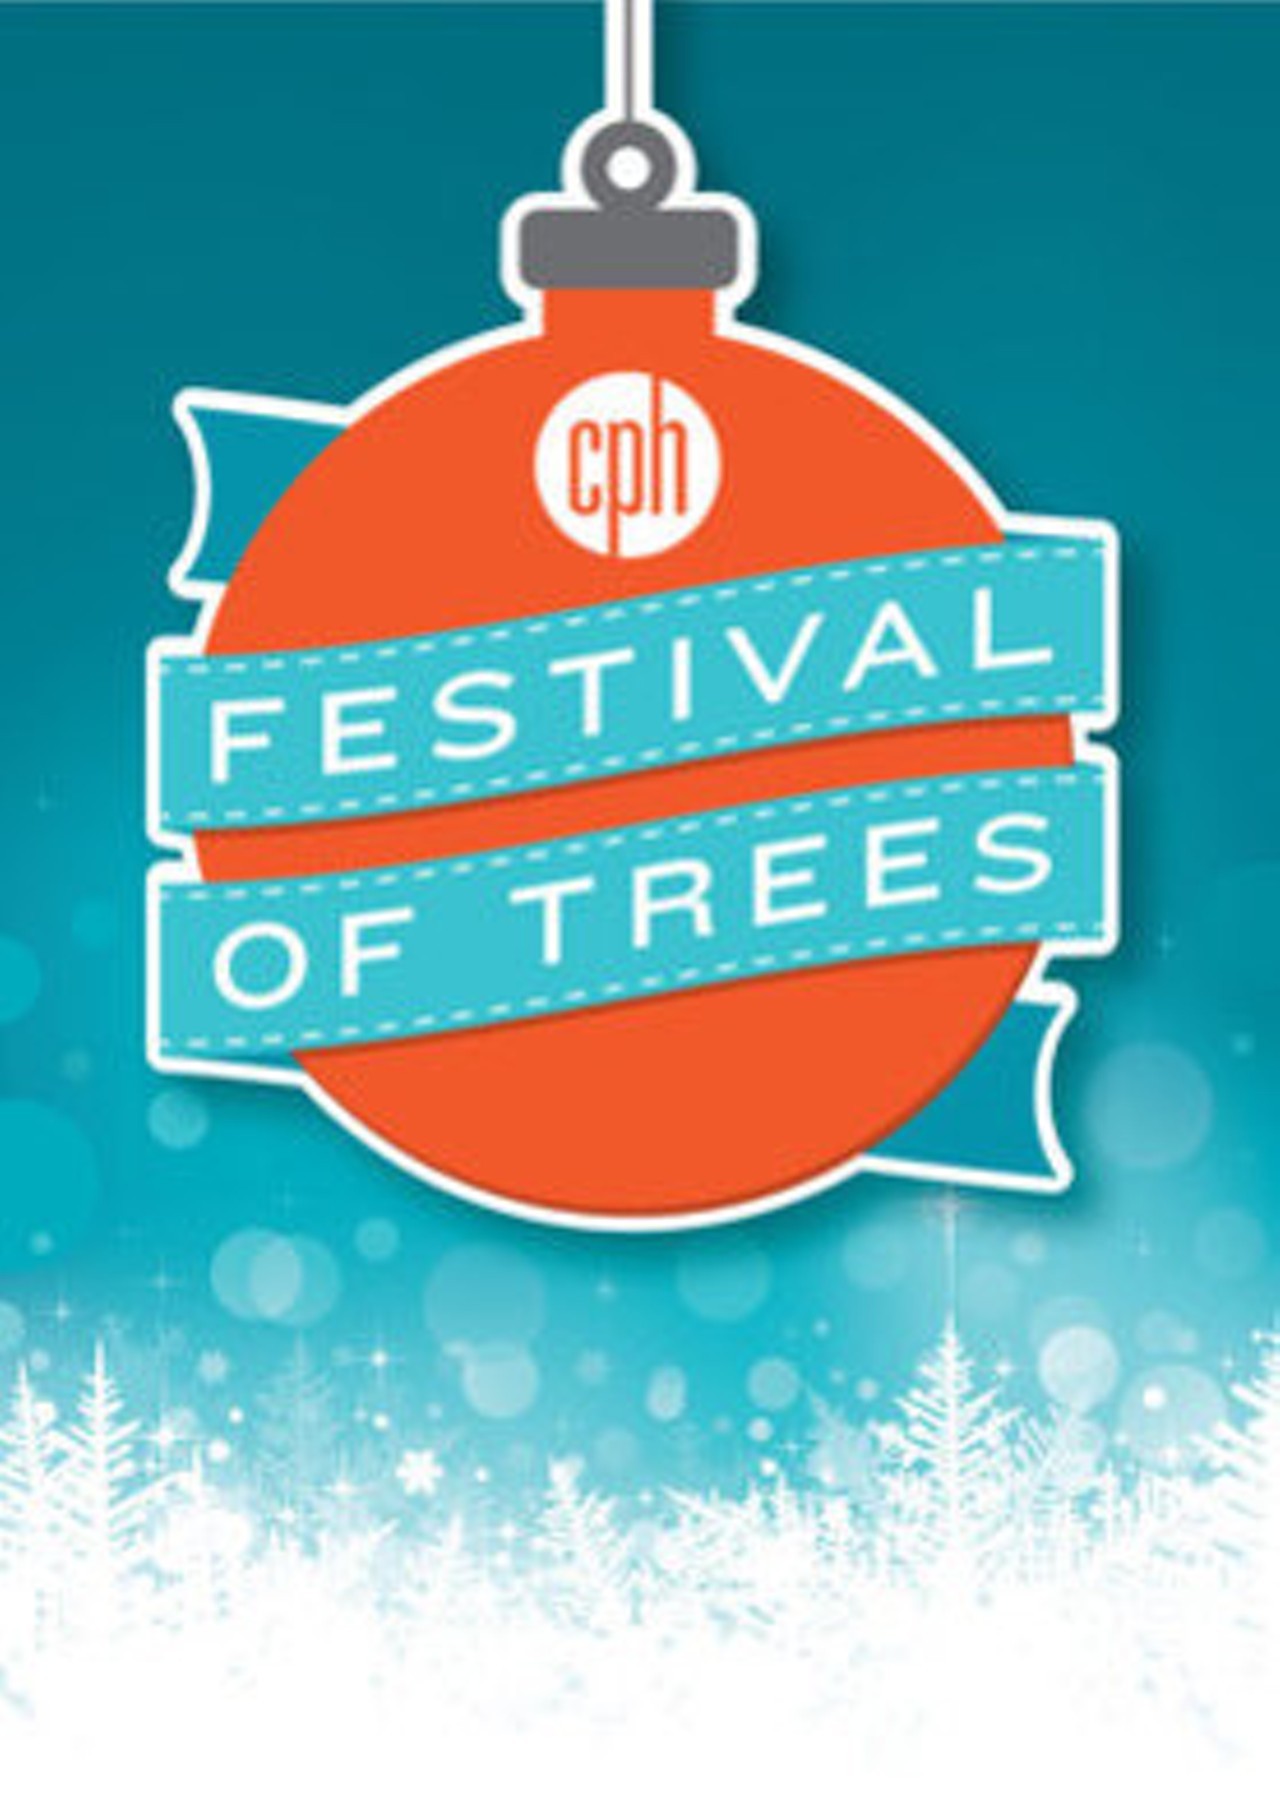 Festival of Trees 
When: Thu., Dec. 22, 12-9 p.m. and Fri., Dec. 23, 12-5 p.m. 
Phone: 216-400-7053 
Price: FREE 
www.clevelandplayhouse.com/festival-of-trees
Get into the spirit of the season with Cleveland Play House&#146;s beloved annual holiday tradition, Festival of Trees. The Allen Theatre lobbies will shine brightly with the twinkling light of trees masterfully decorated by local designers. This family-friendly event is free, open to the public, and sure to be a delight for all. For more information about the Festival of Trees, contact Kat Clark at 216.400.7053. (Photo courtesy Allen Theater)